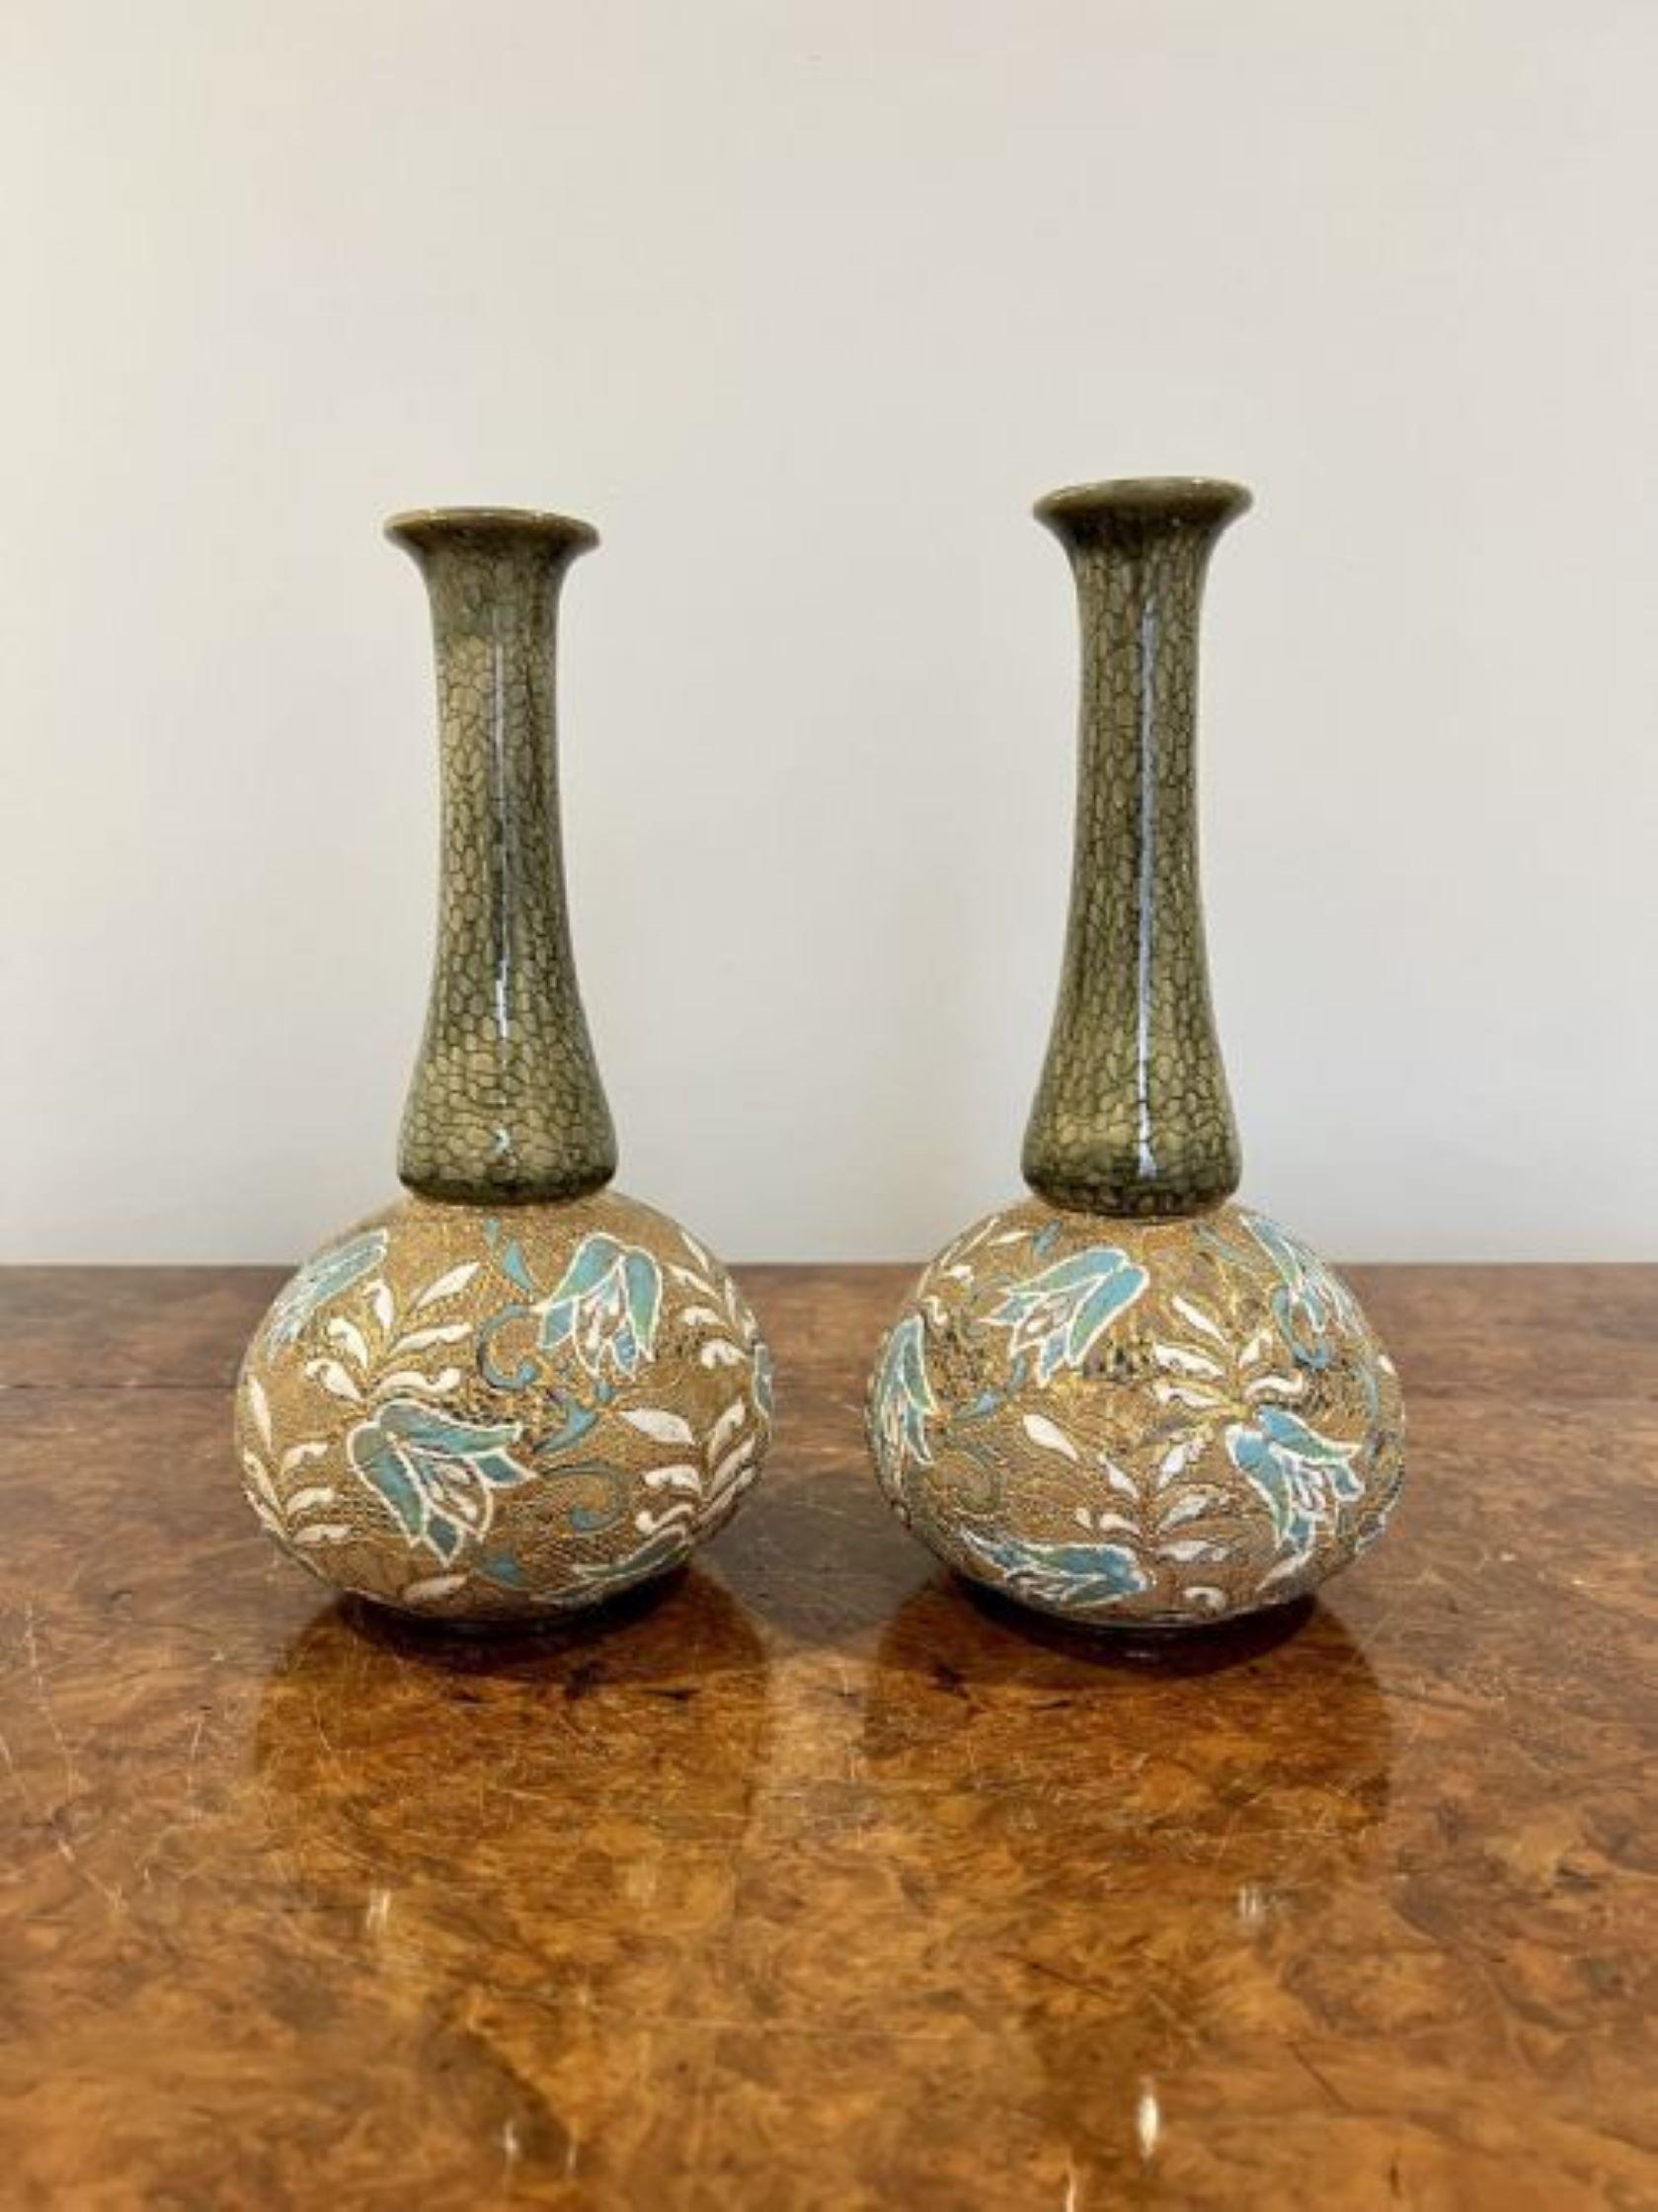 Stunning pair of quality antique Doulton shaped vases having a quality pair of antique shaped Doulton vases, having a bulbous shaped body with raised tubework in White, Blue and Gold colours decorated with flowers and leaves with green shaped tops. 